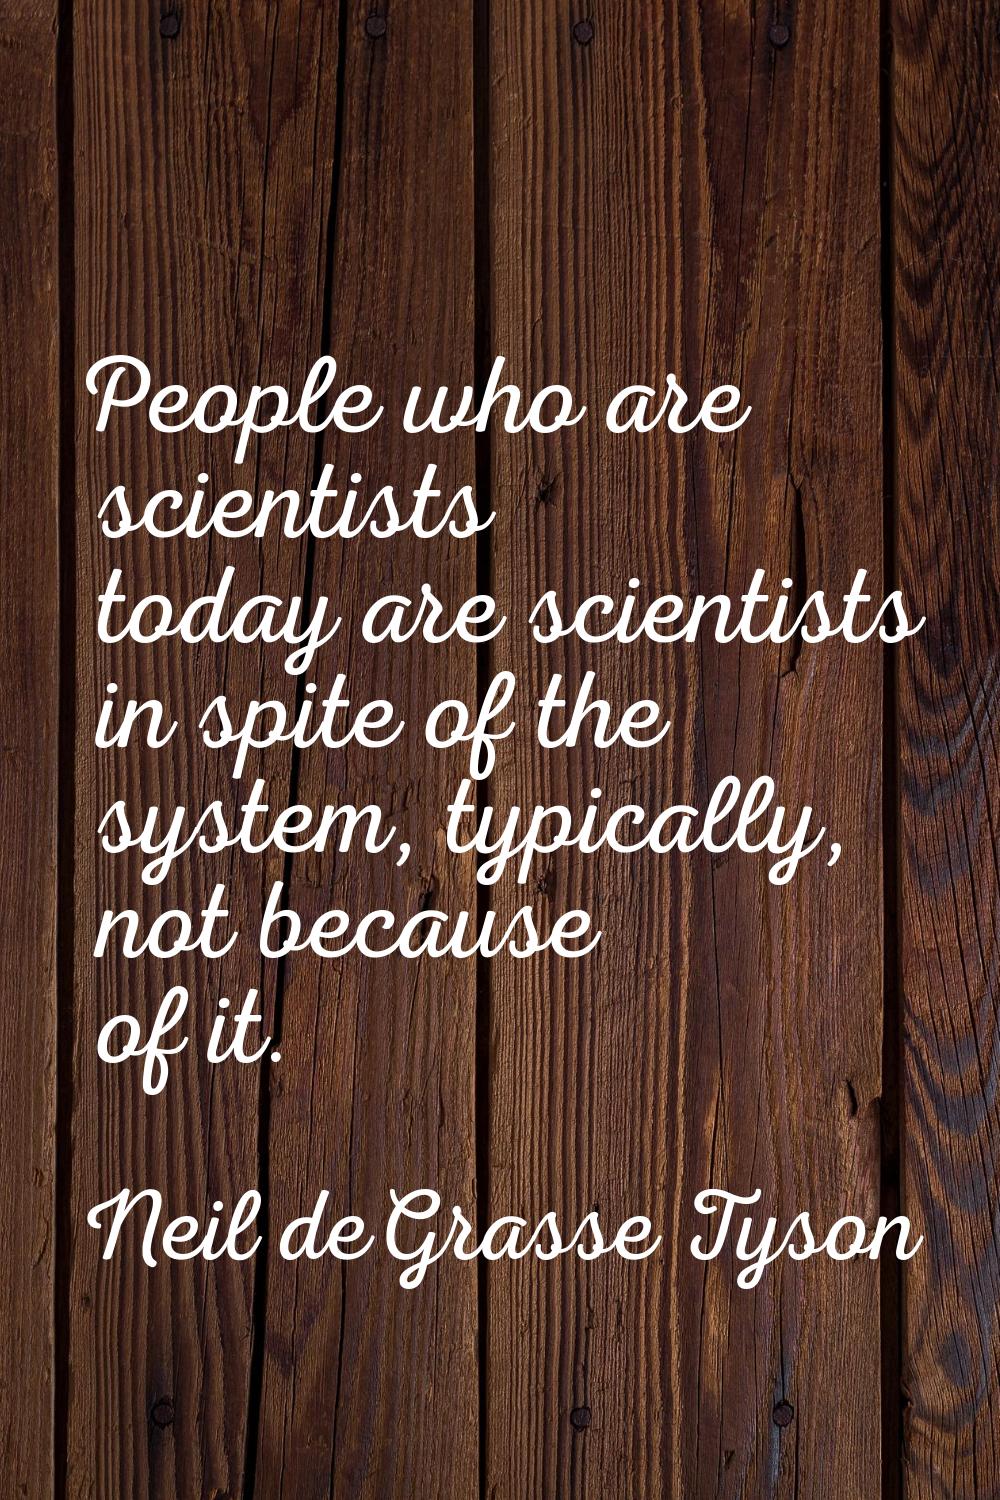 People who are scientists today are scientists in spite of the system, typically, not because of it